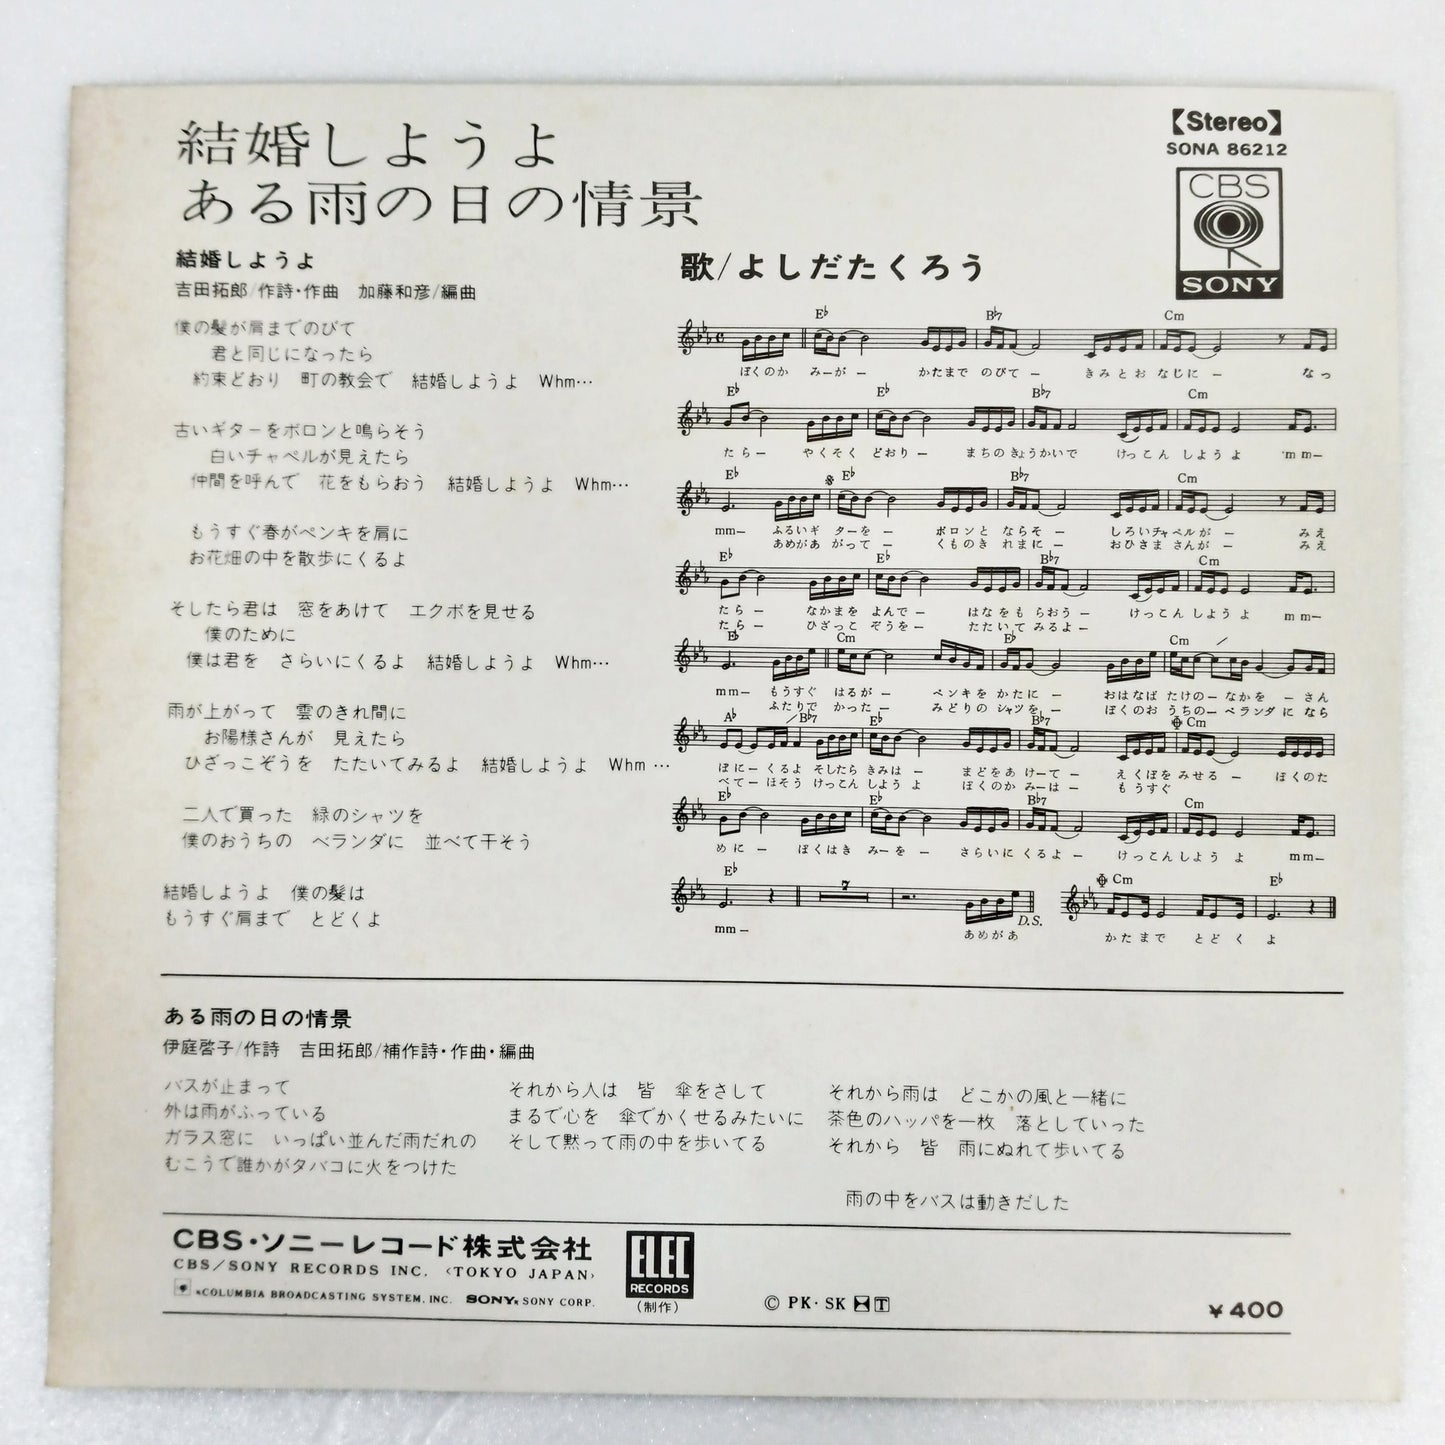 1972 Let's get married Takuro Yoshida B: A scene from a rainy day Japanese record vintage